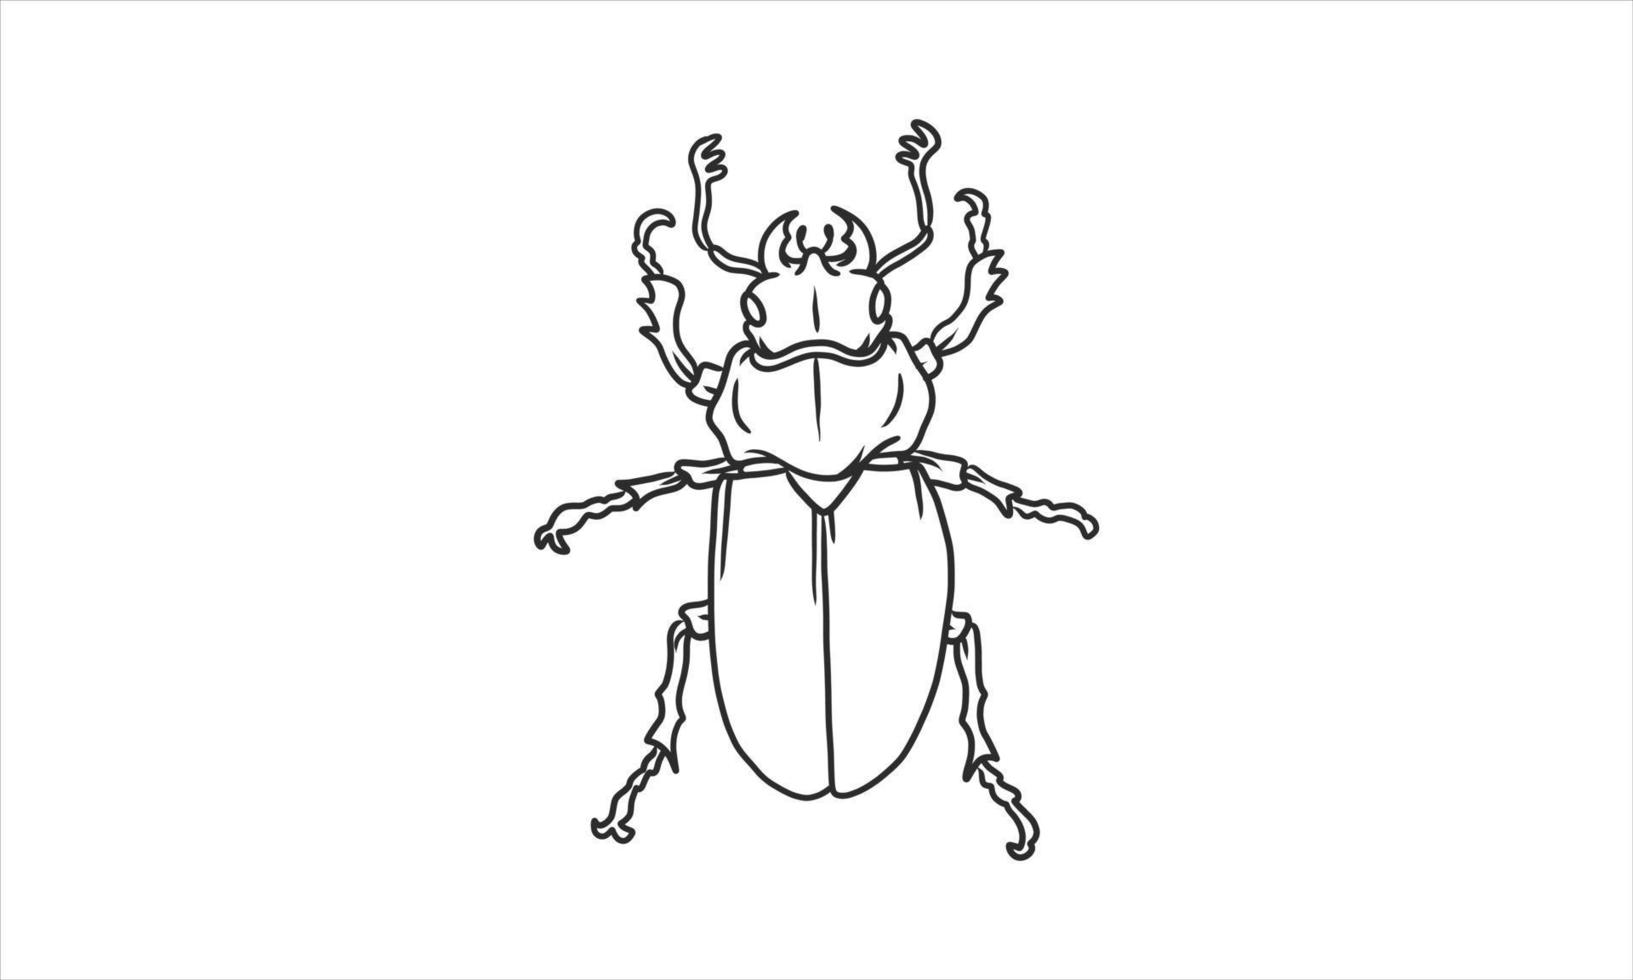 Vector lineart illustration of beetles on white background, hand drawn Japanese horned beetle bug insect sketch